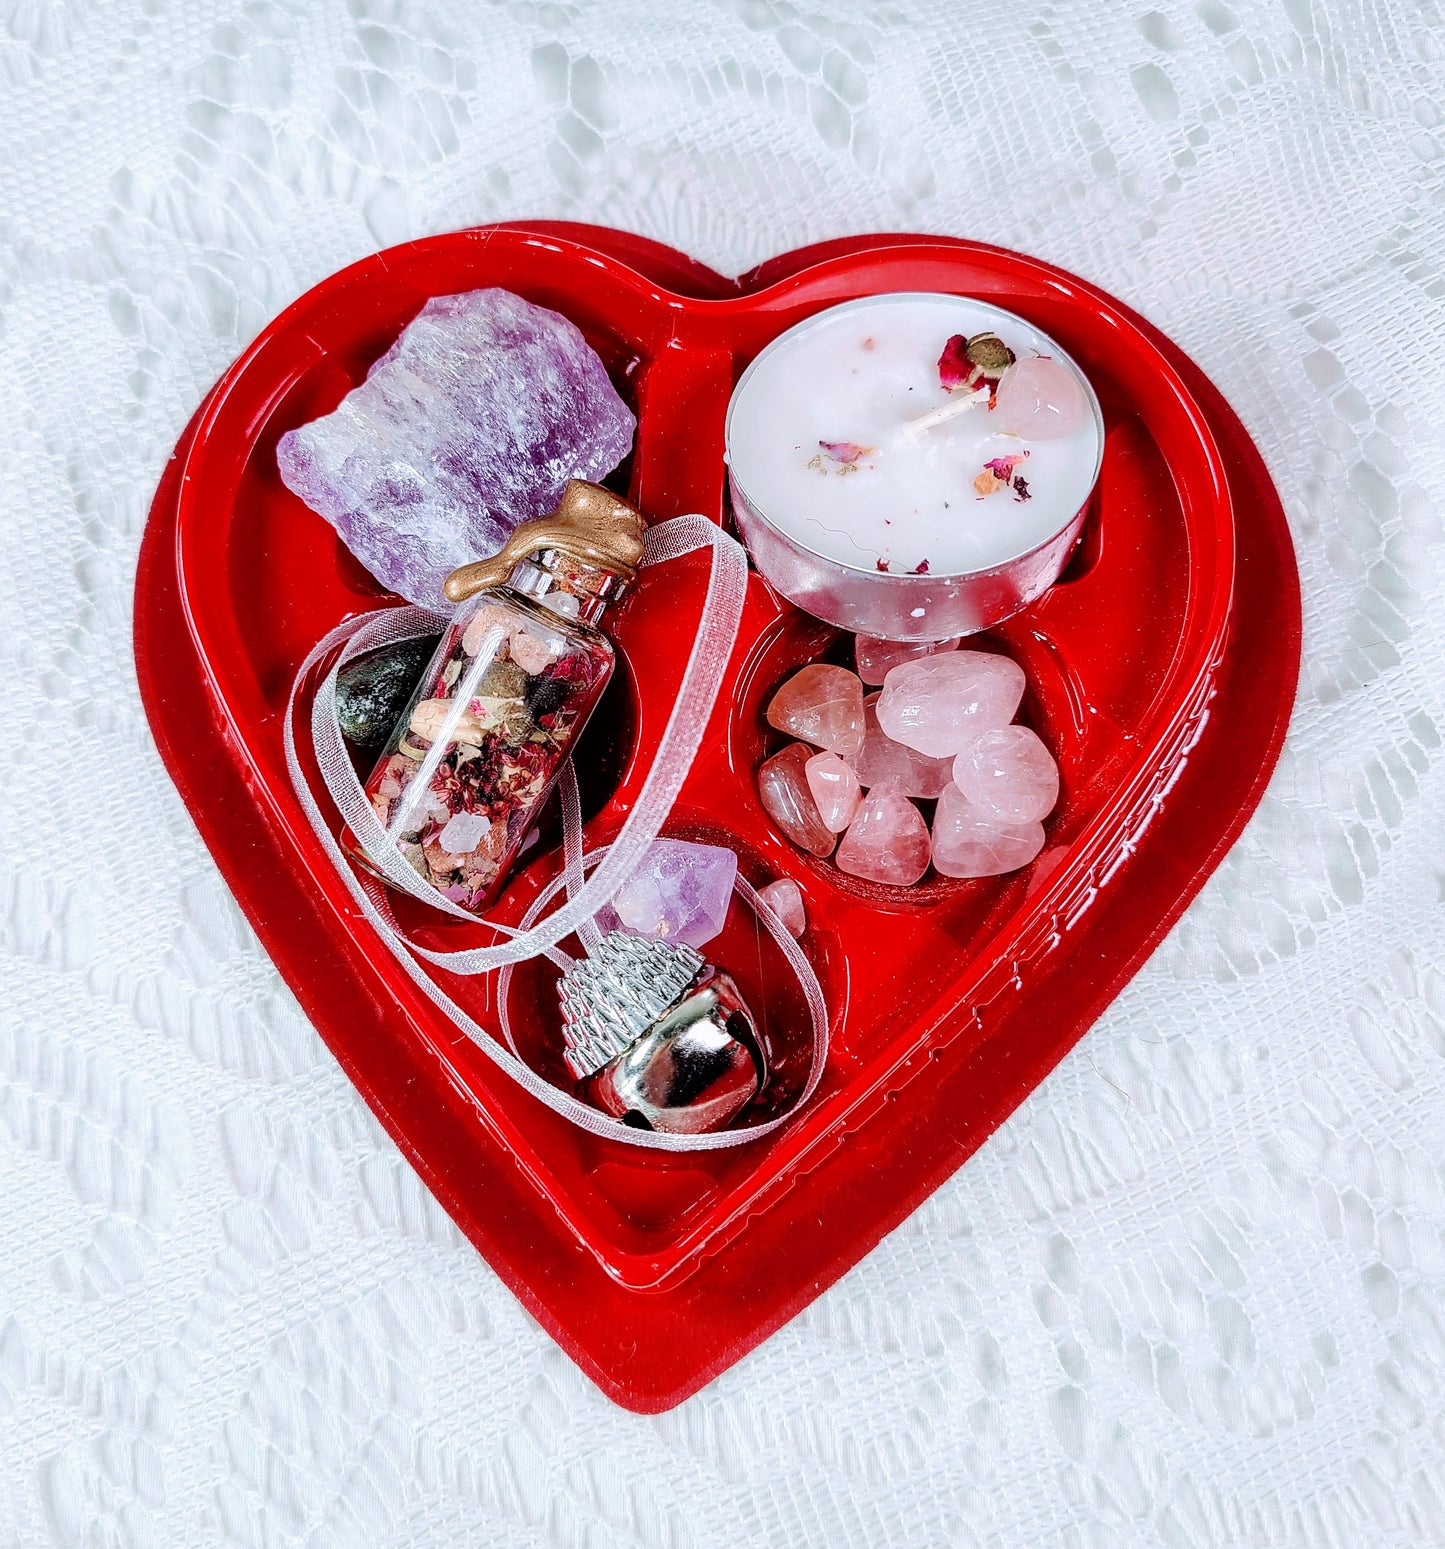 Unique Skull Moth Collage Mixed Media Heart Shaped Trinket Box ~ Love Magick ~ Filled with Goodies ~ OOAK Box plus Mini Love Candle, Spell Jar, Fairy Bell and Crystals ~ Valentine's Day Gift